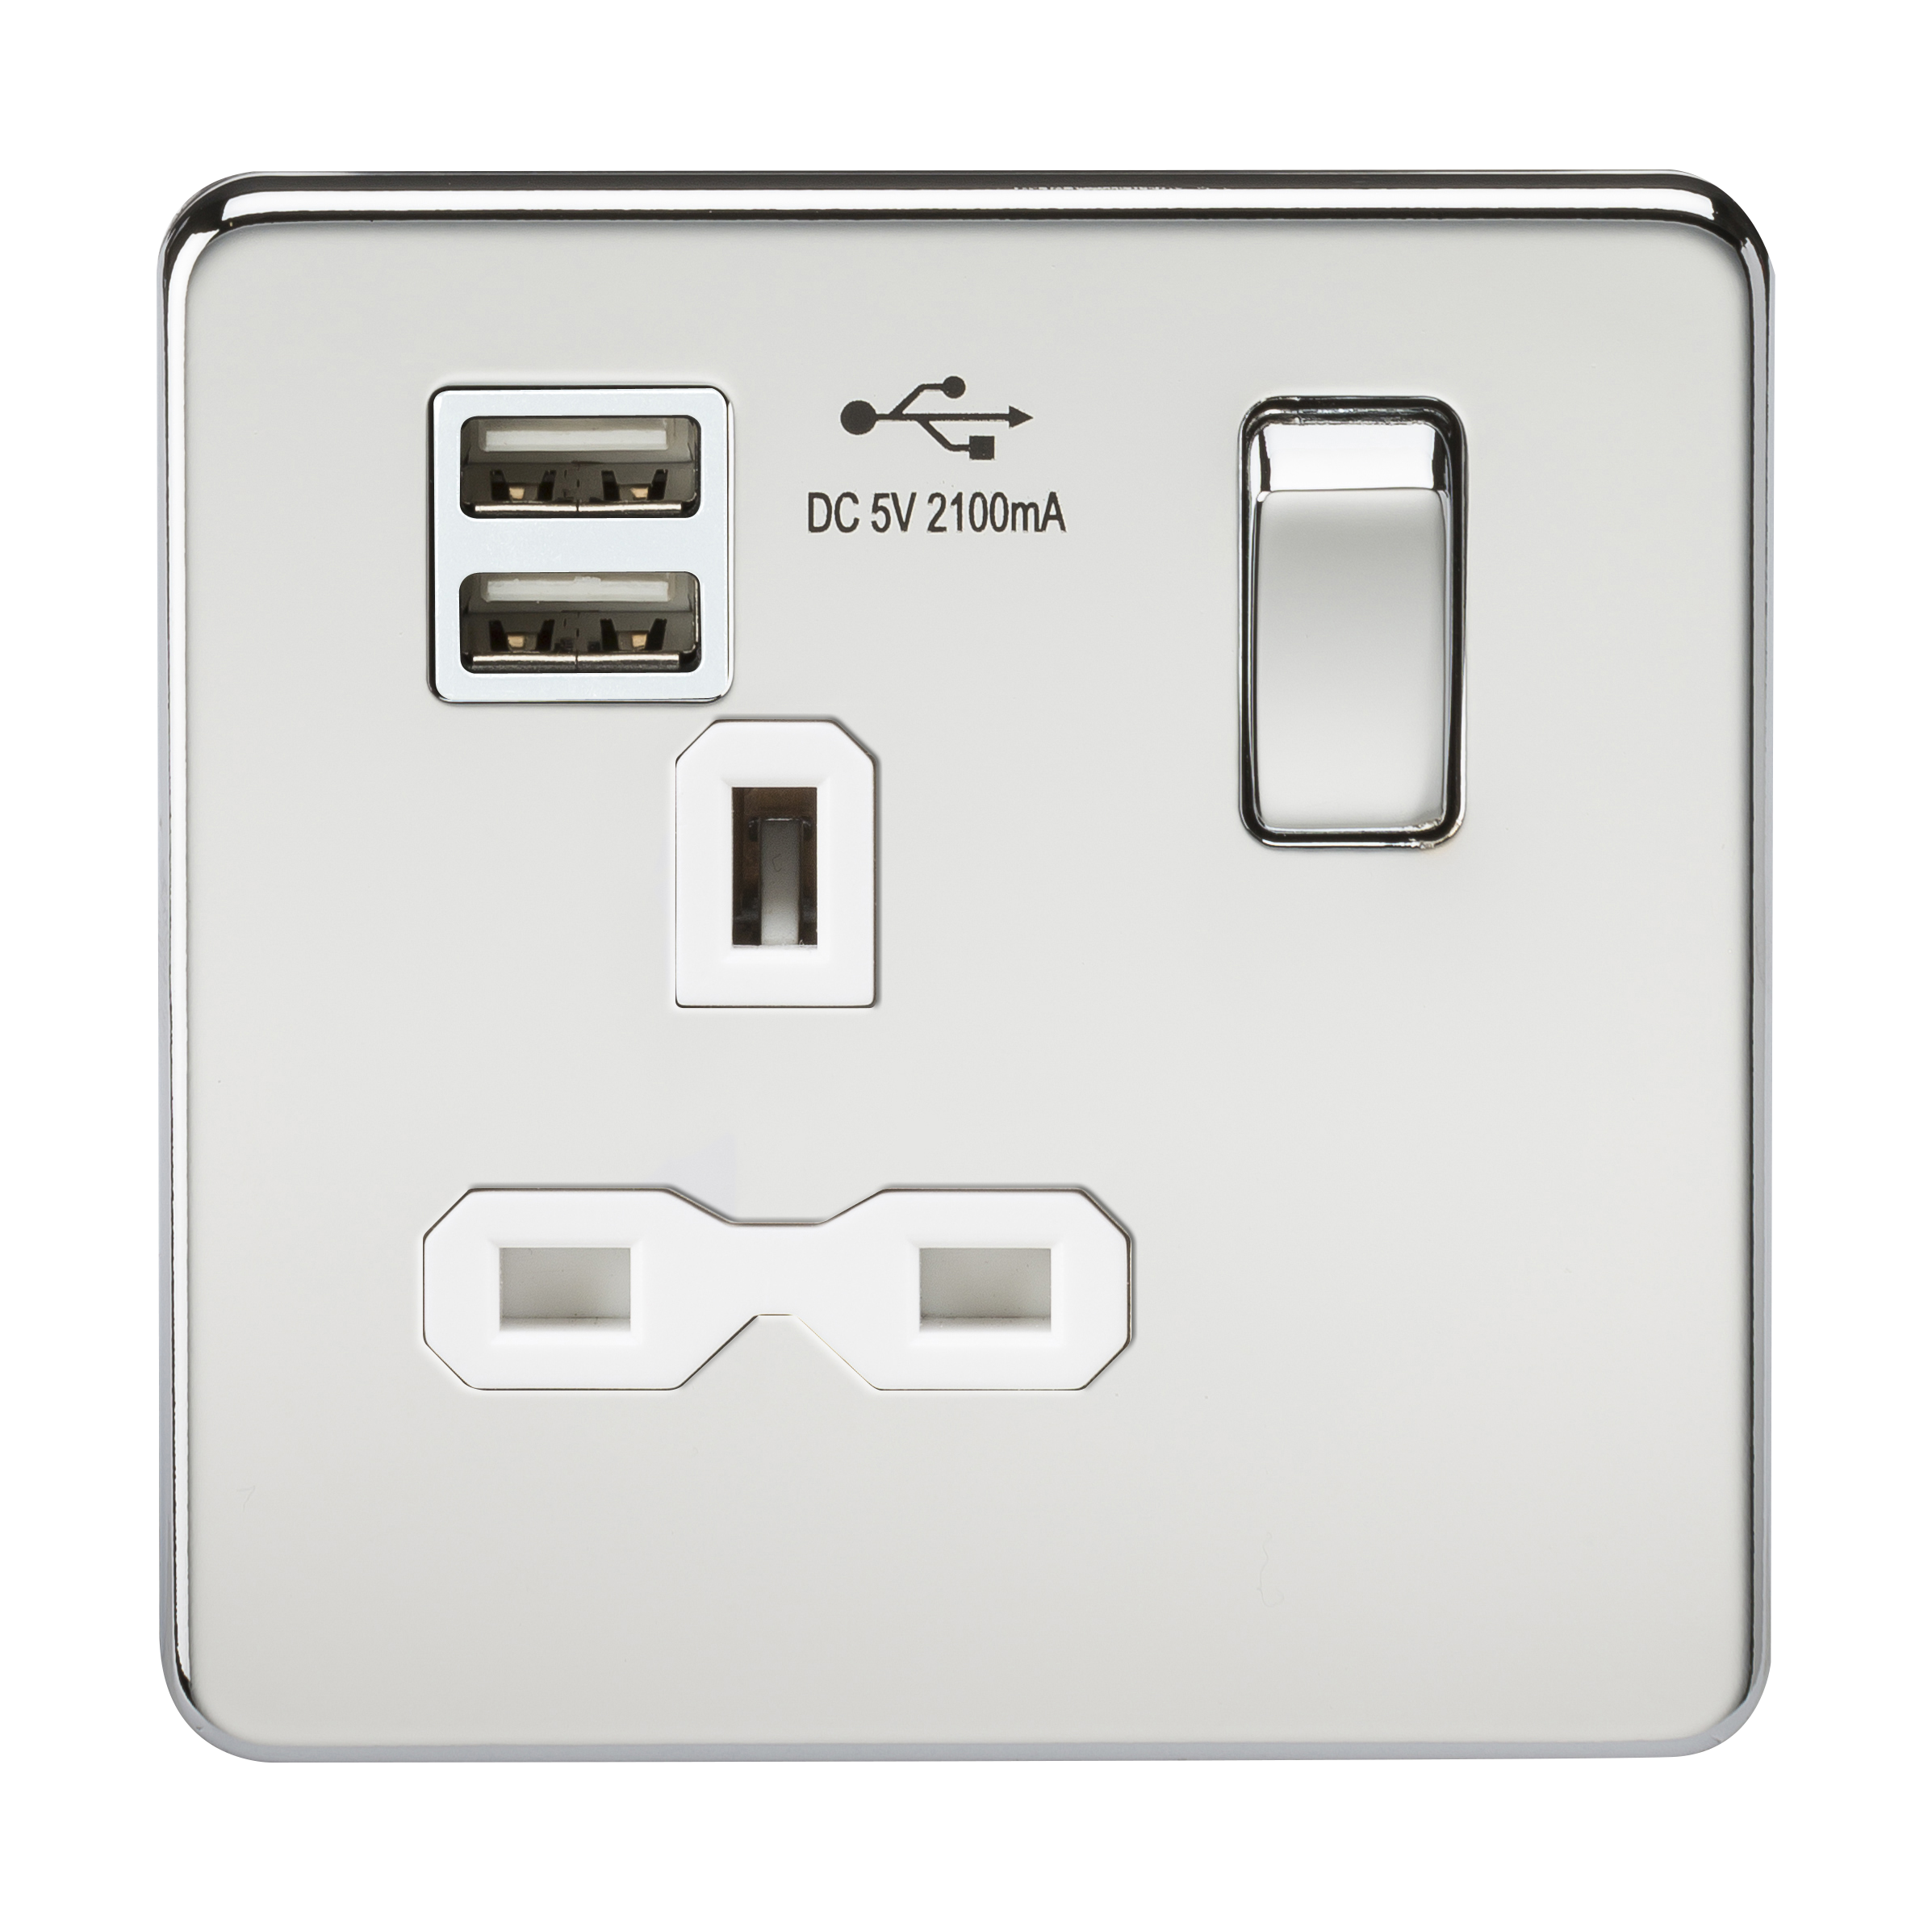 Screwless 13A 1G Switched Socket With Dual USB Charger (2.1A) - Polished Chrome With White Insert - SFR9901PCW 